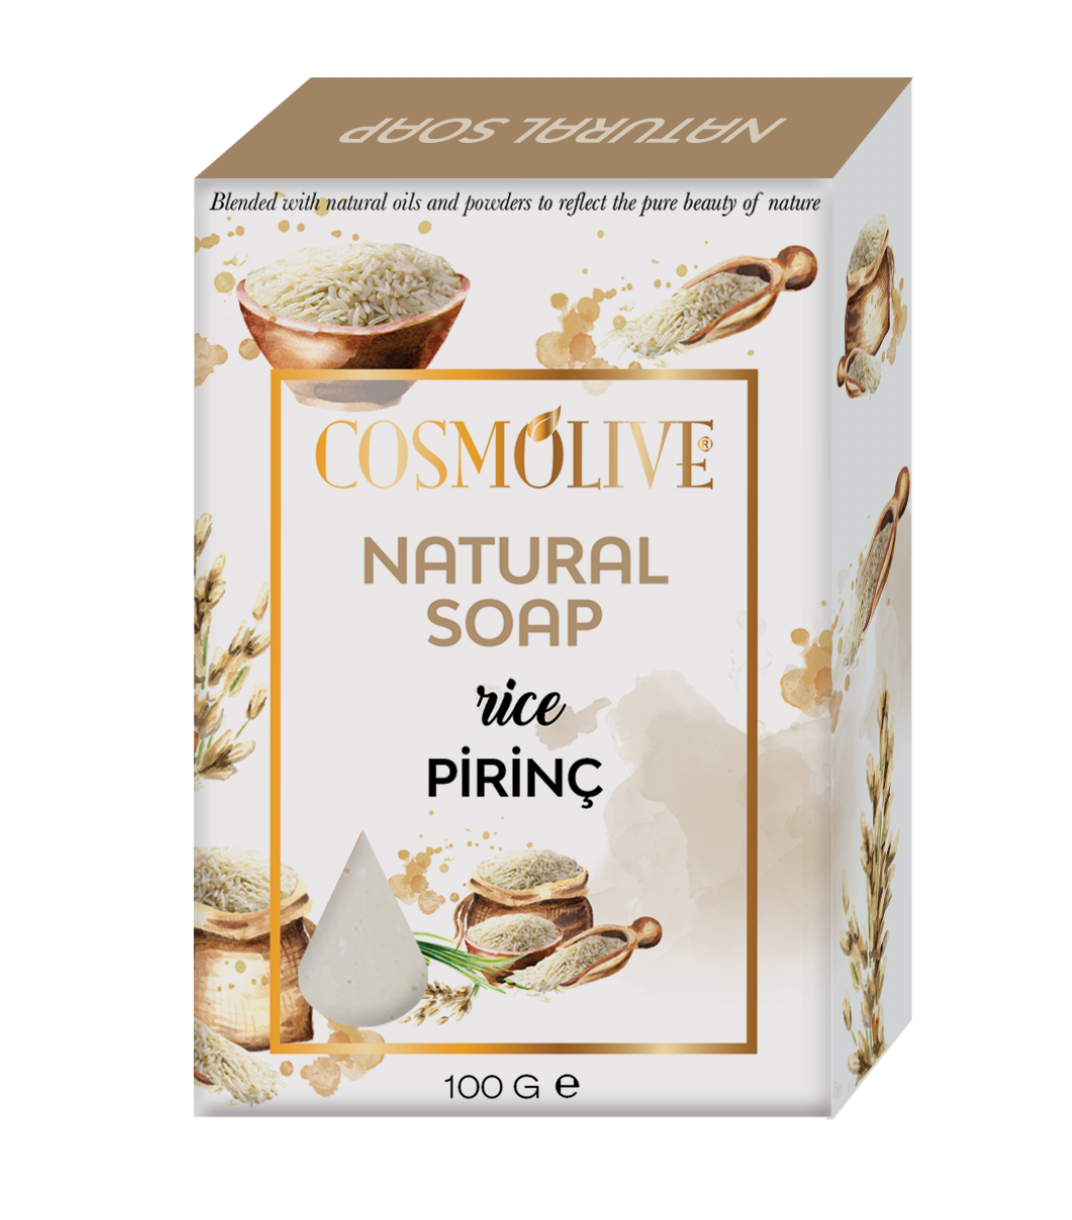 COSMOLIVE RICE NATURAL SOAP 100 g / Effective Against Redness and Itching / Natural Life